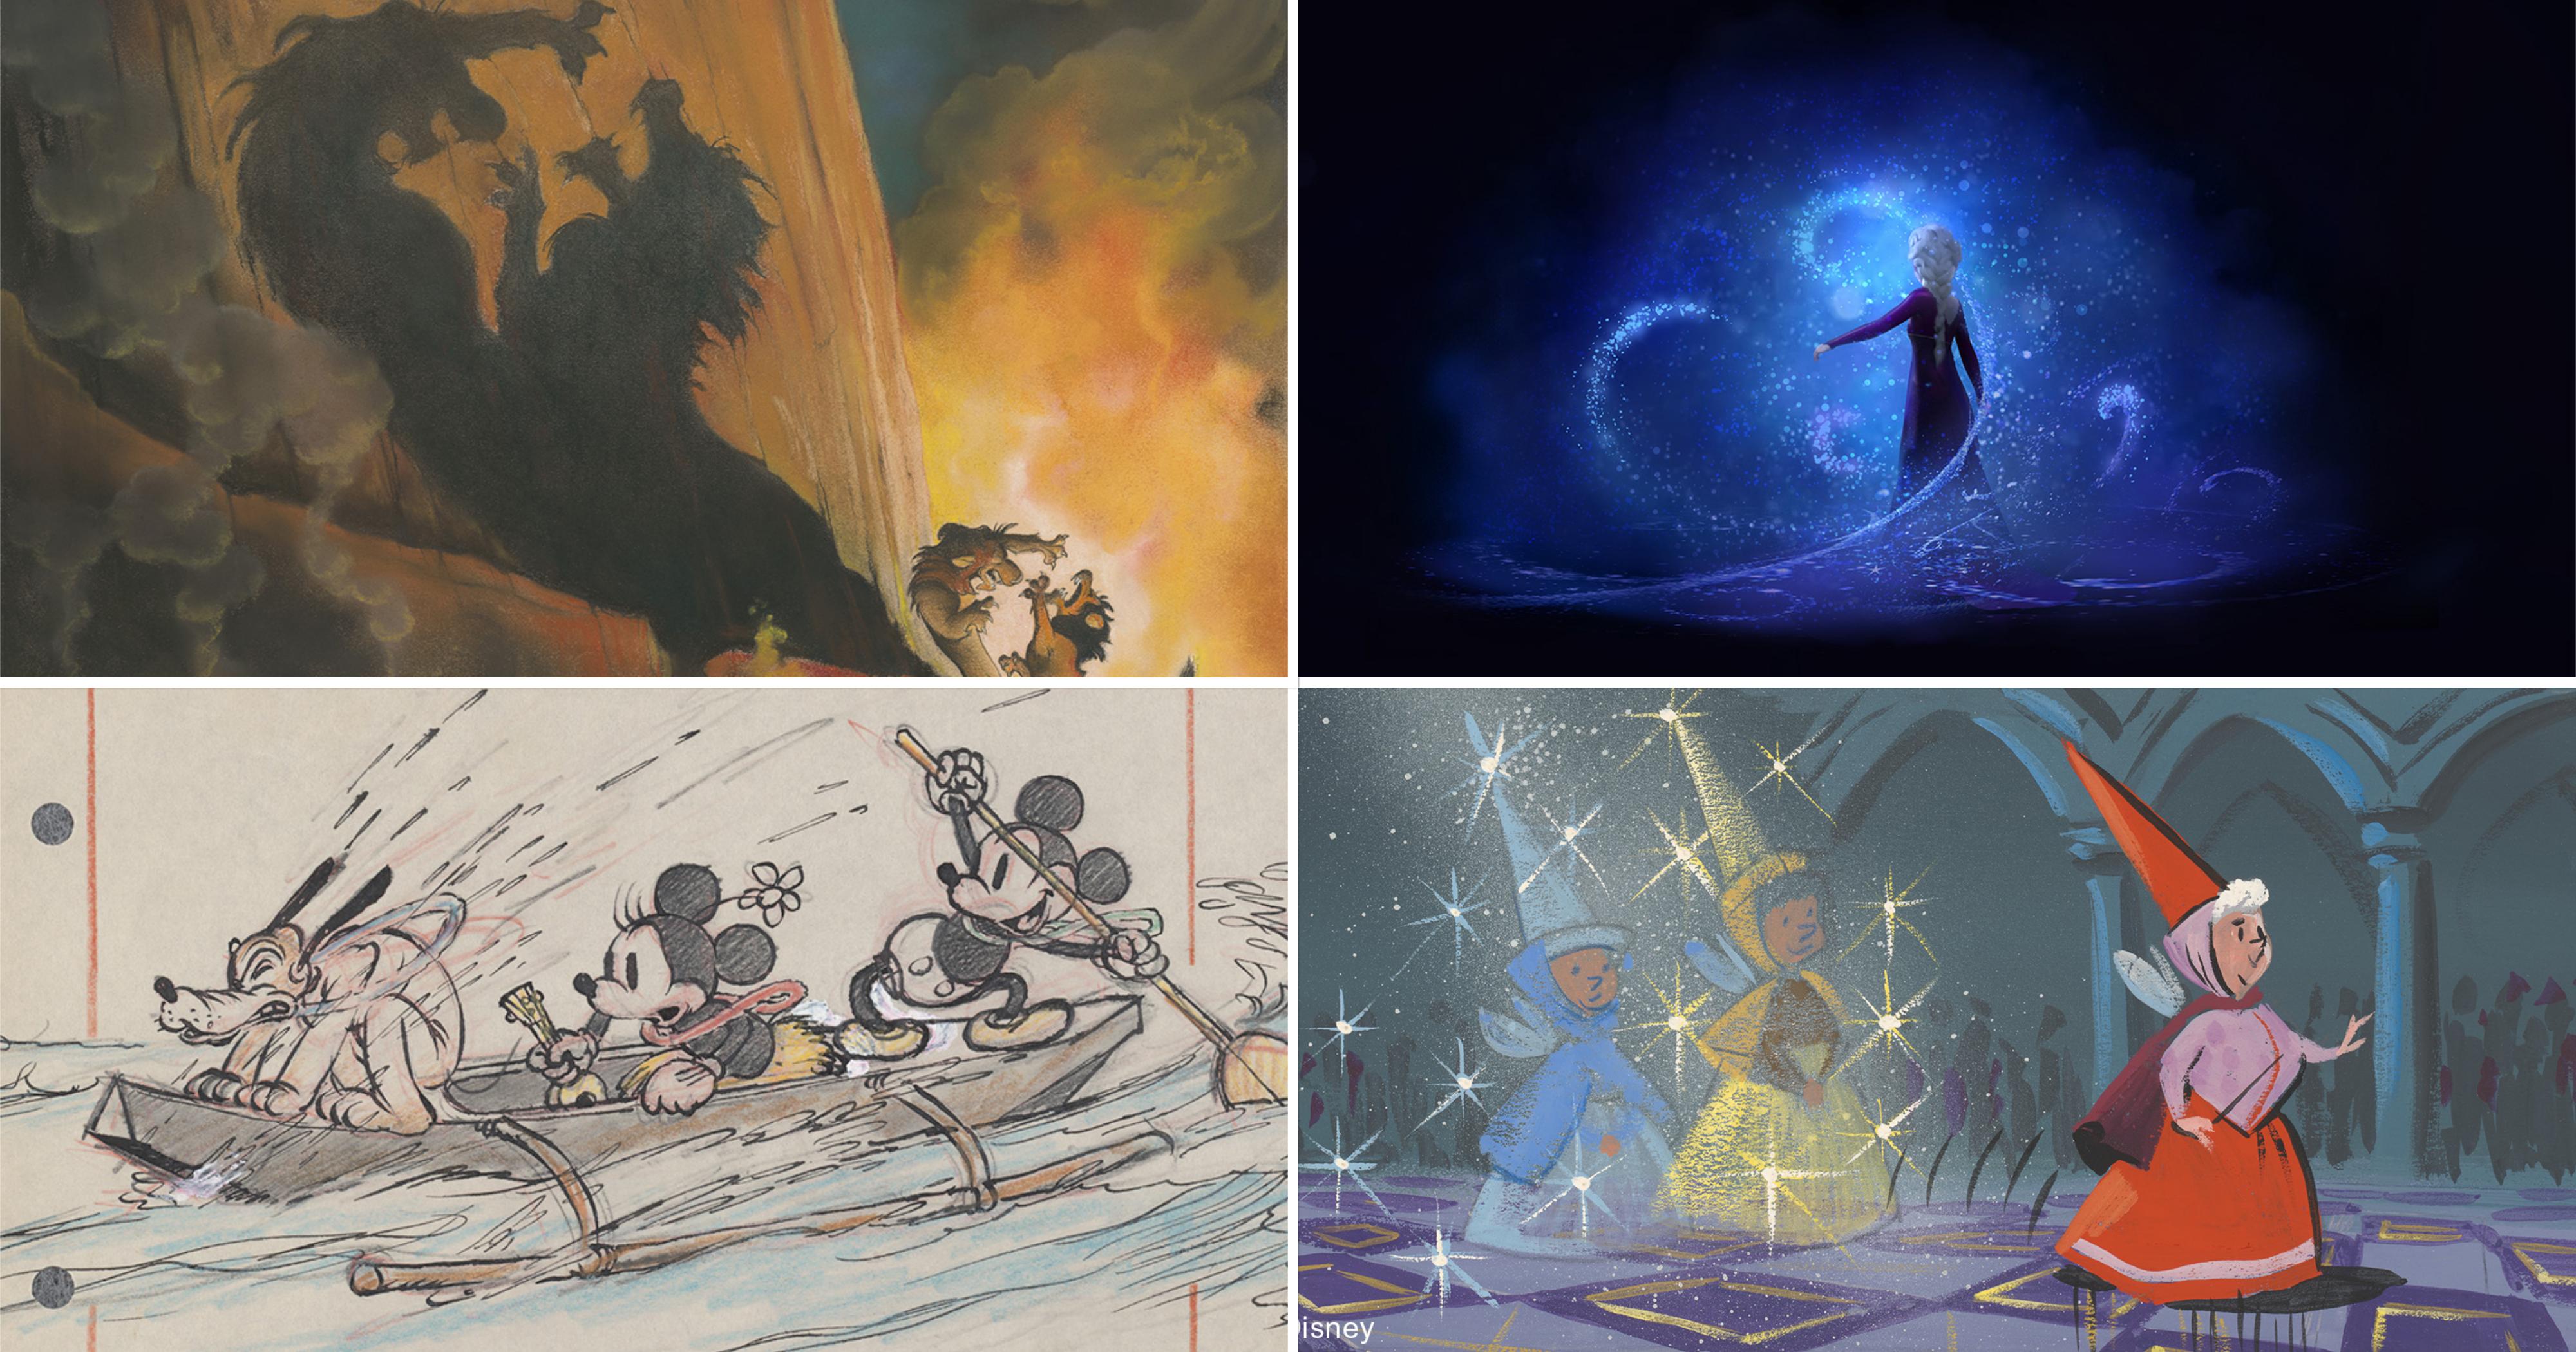 Disney animation exhibition at ArtScience Museum from Oct. 26, 2019 - March  29, 2020  - News from Singapore, Asia and around the world